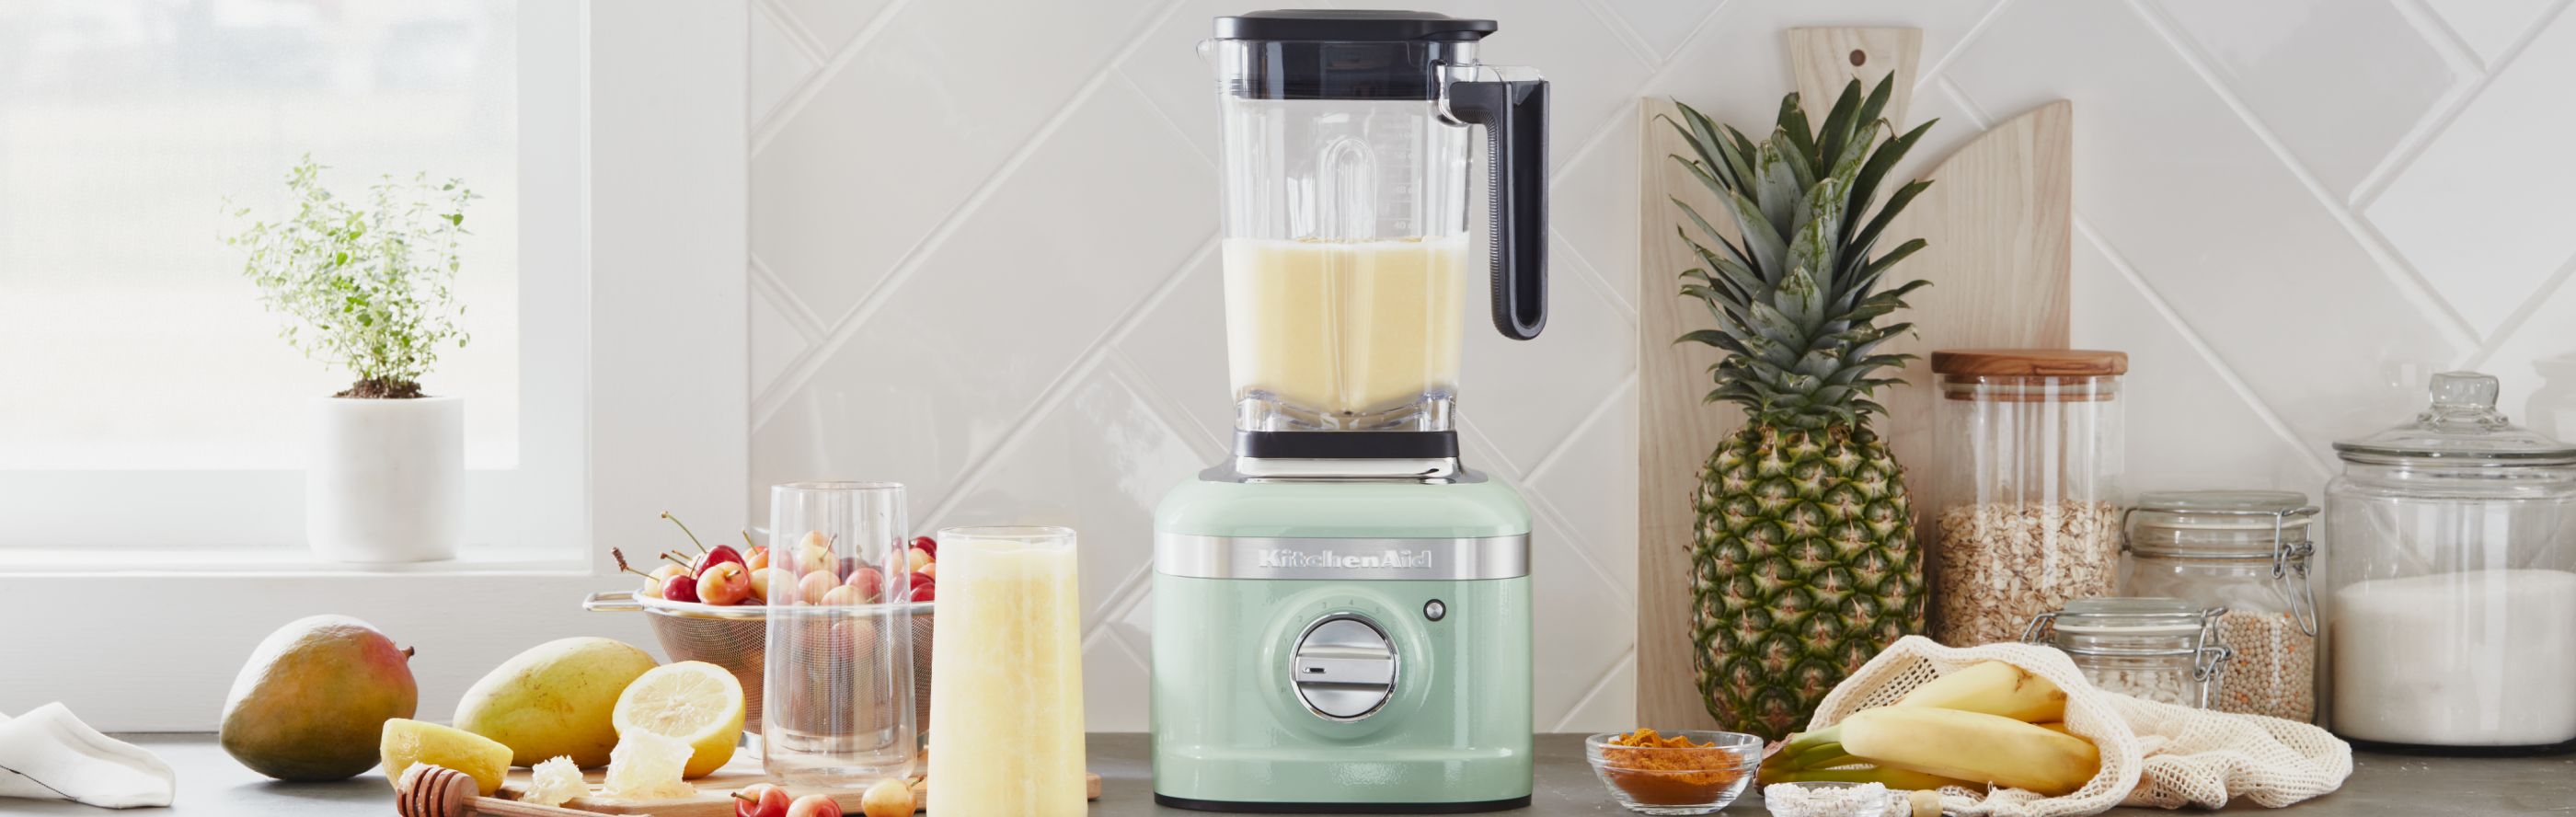 3 Types of Buying Guide | KitchenAid